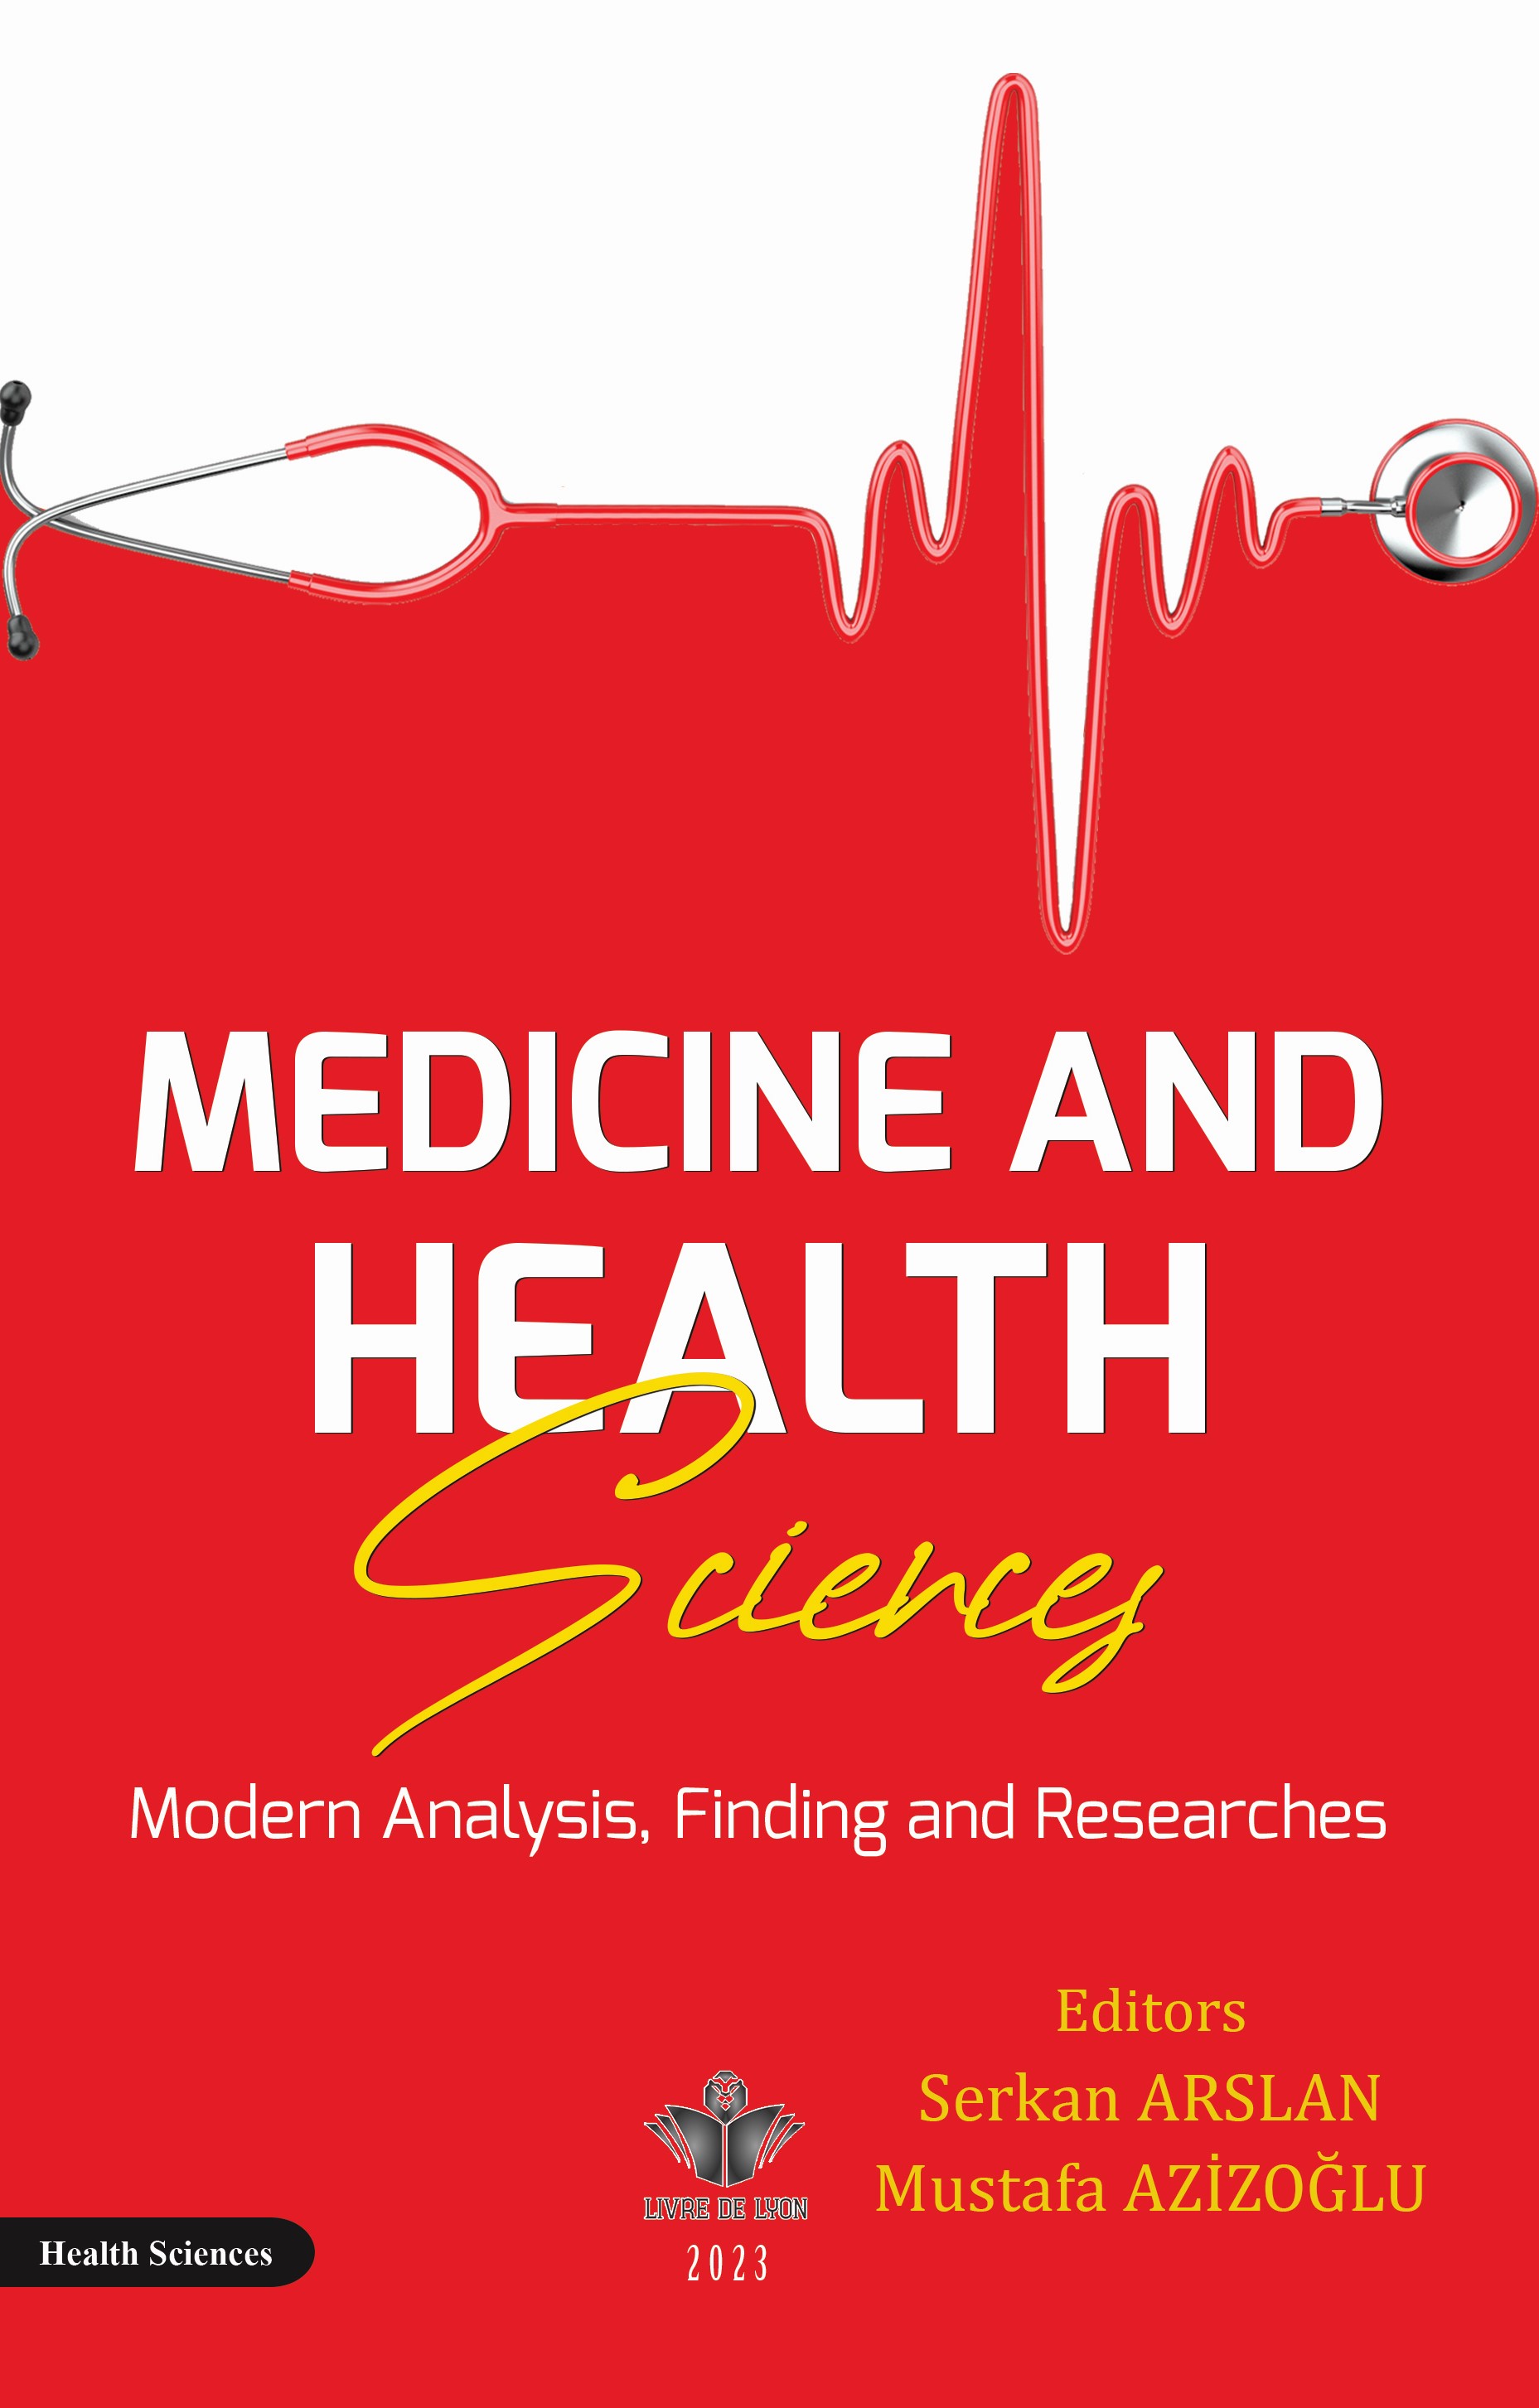 Medicine and Health Sciences Modern Analysis, Finding and Researches